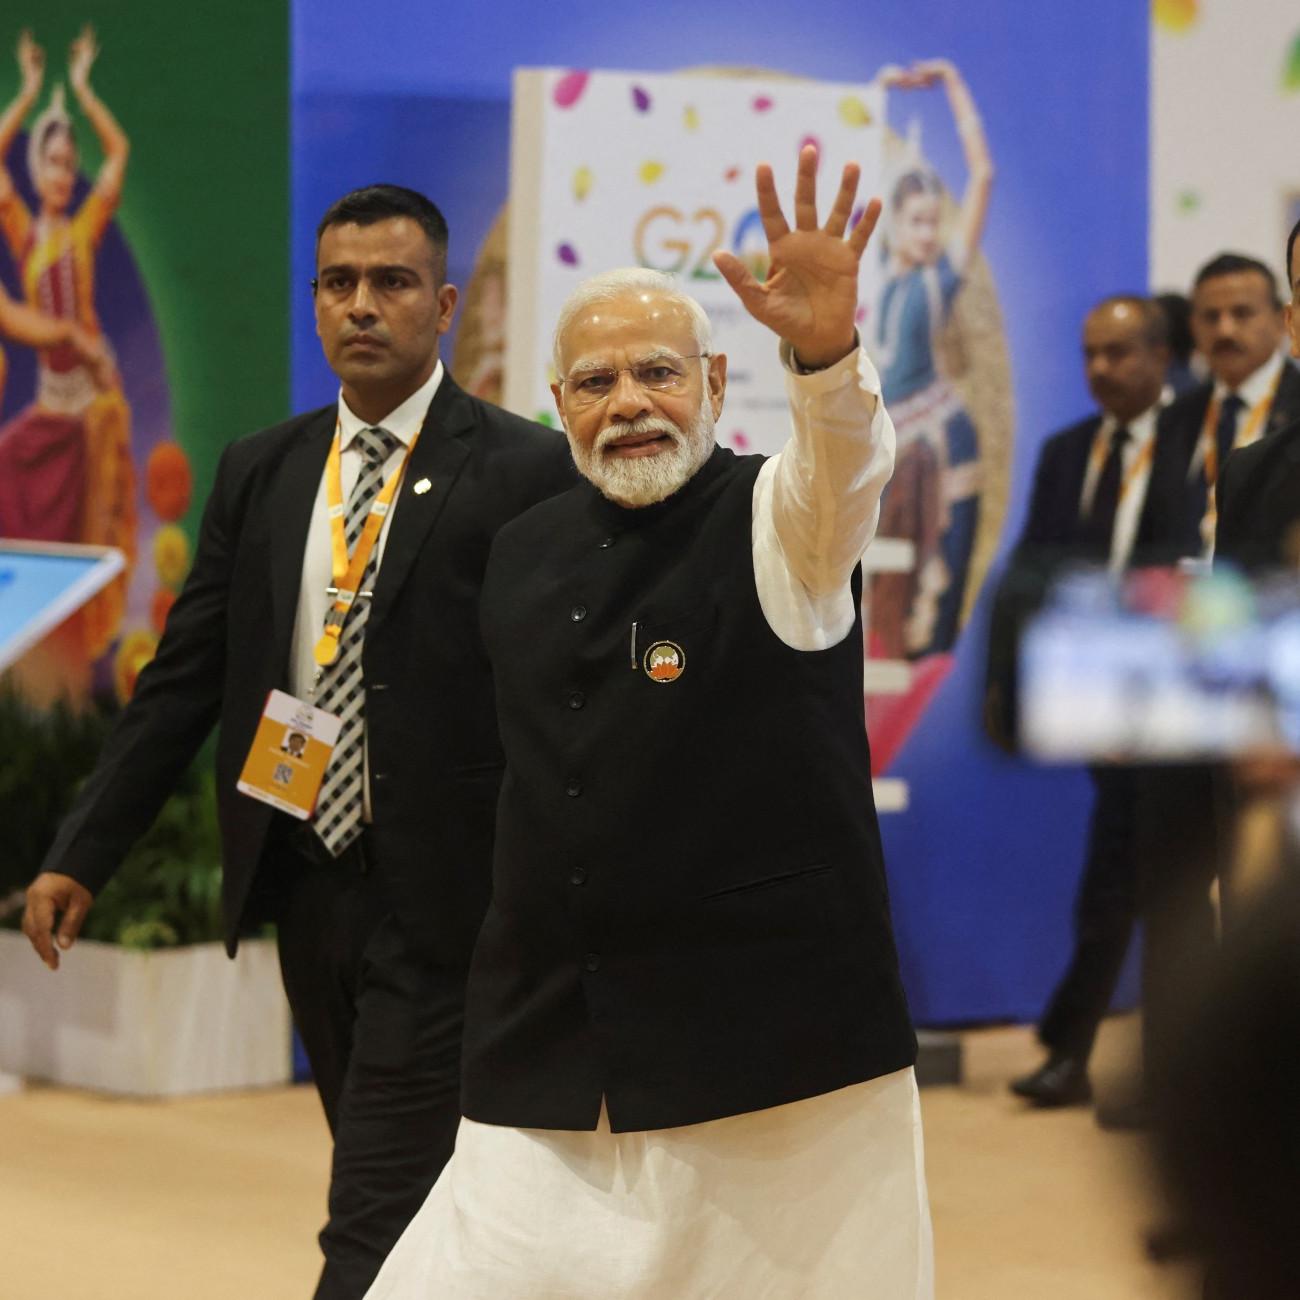 Indian Prime Minister Narendra Modi waves as he visits International Media Center, on the second day of the G20 summit in New Delhi, India,